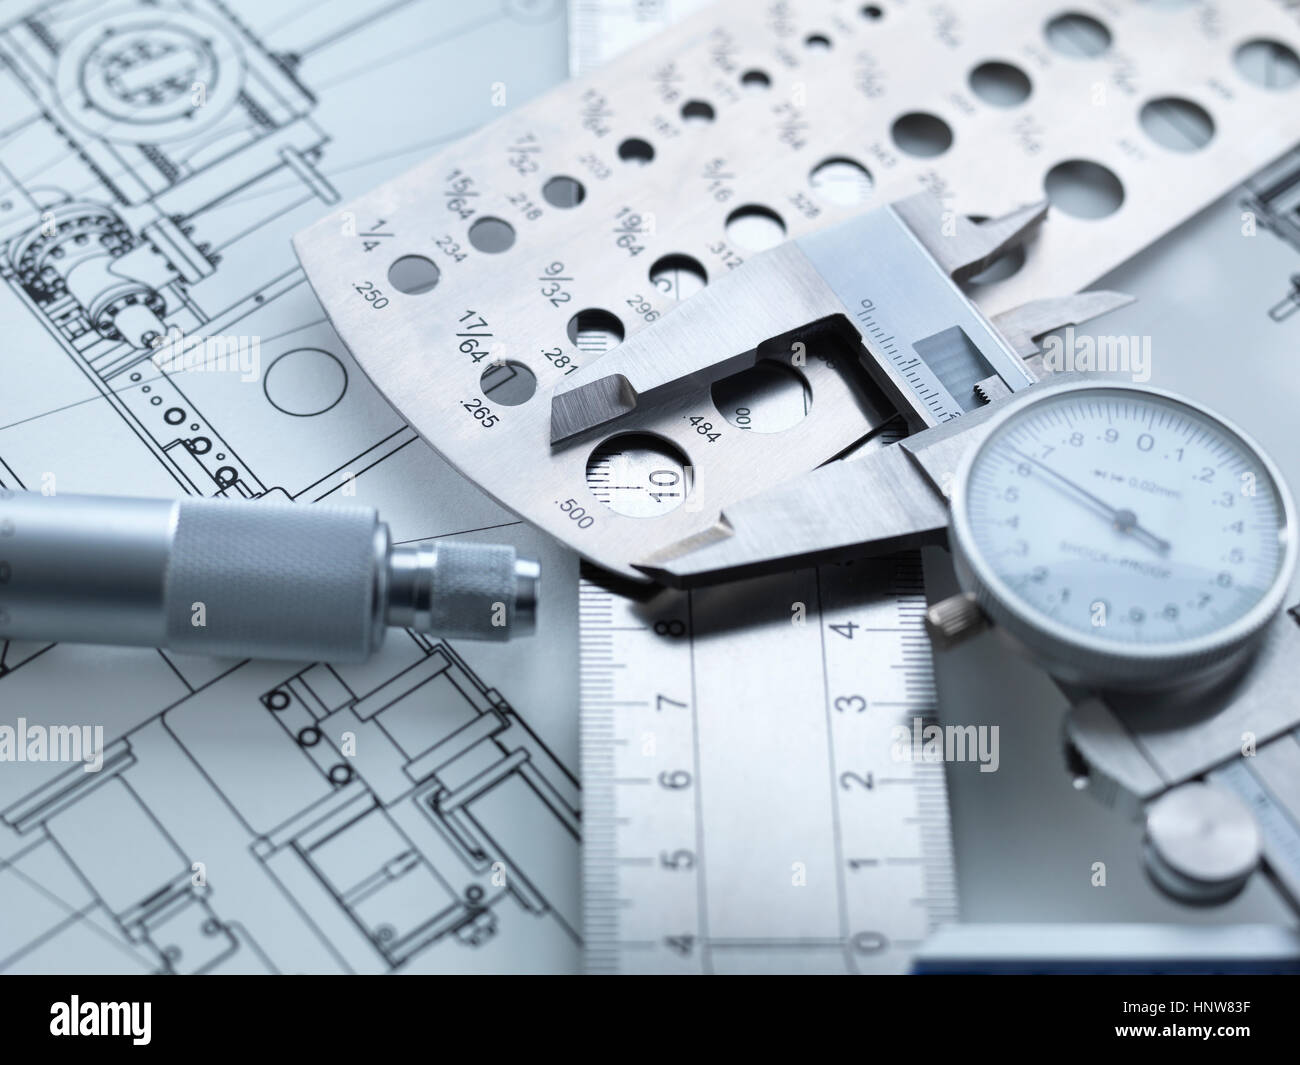 Engineering Measurement, Dial calipers sitting on a steel rule with micrometer and engineering drawings Stock Photo